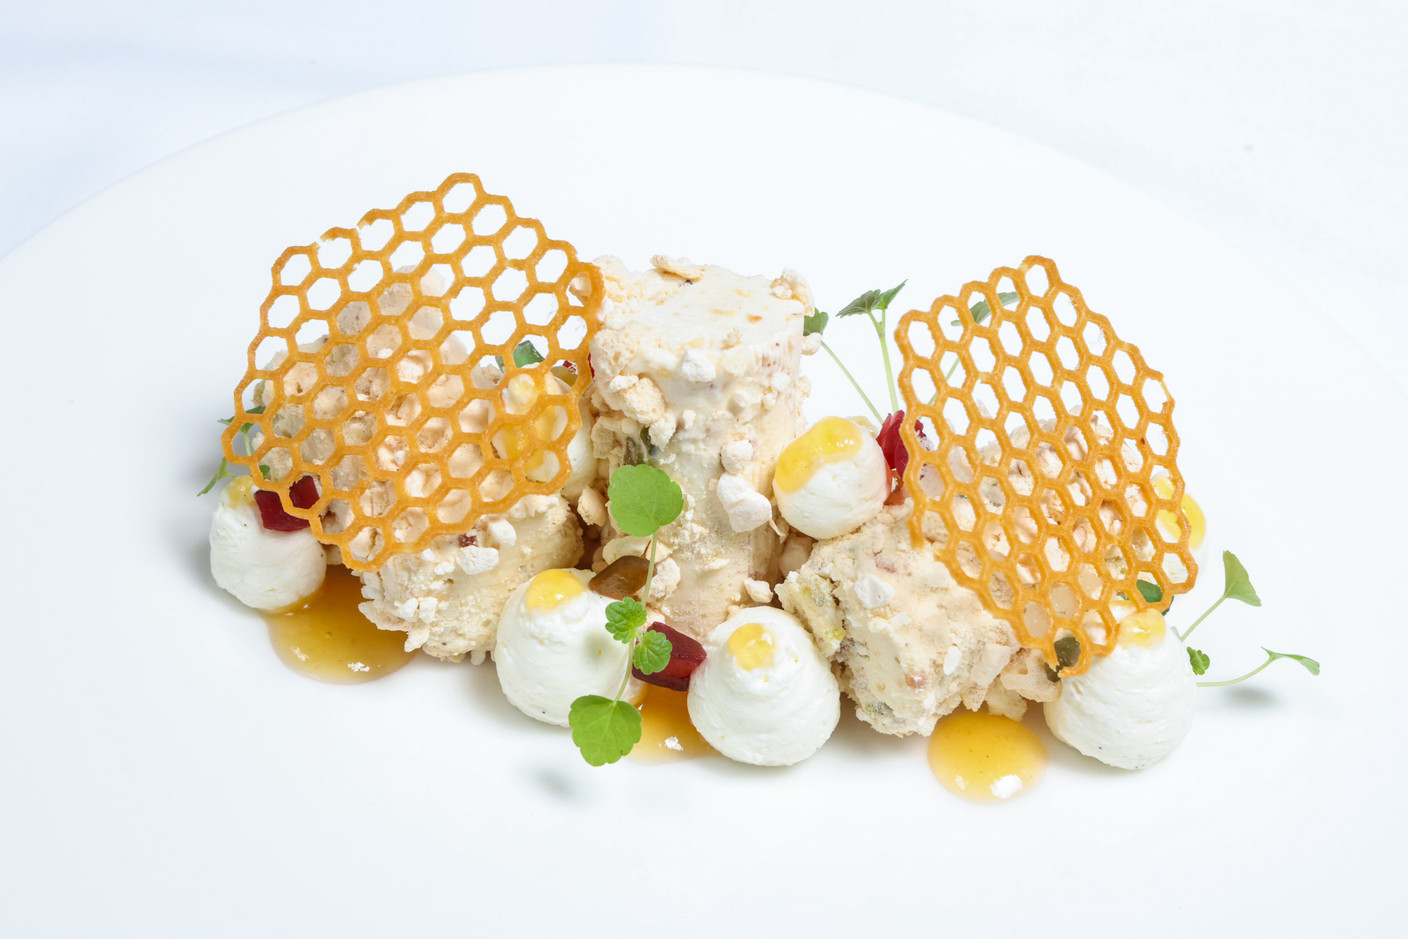 a nougat glacé vacherin — a combination of crisp meringue, ice cream and sorbet, flavoured with pistachios and blossom honey-candied fruits. Crédit photo : Marie Russillo (Maison Moderne)